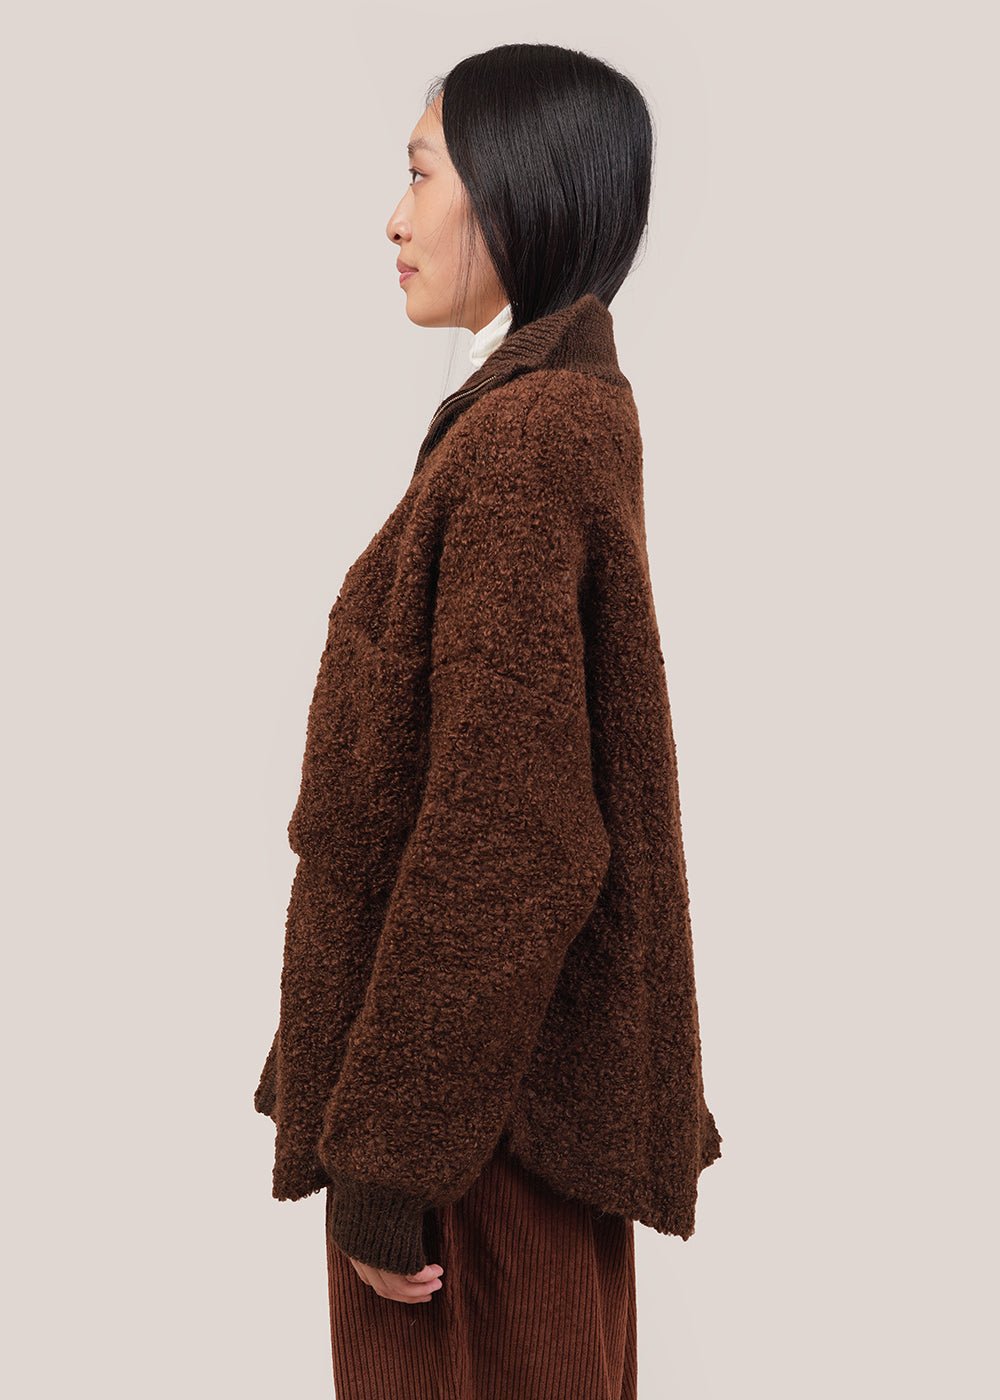 Cordera Tierra Wool/Mohair Jacket - New Classics Studios Sustainable Ethical Fashion Canada